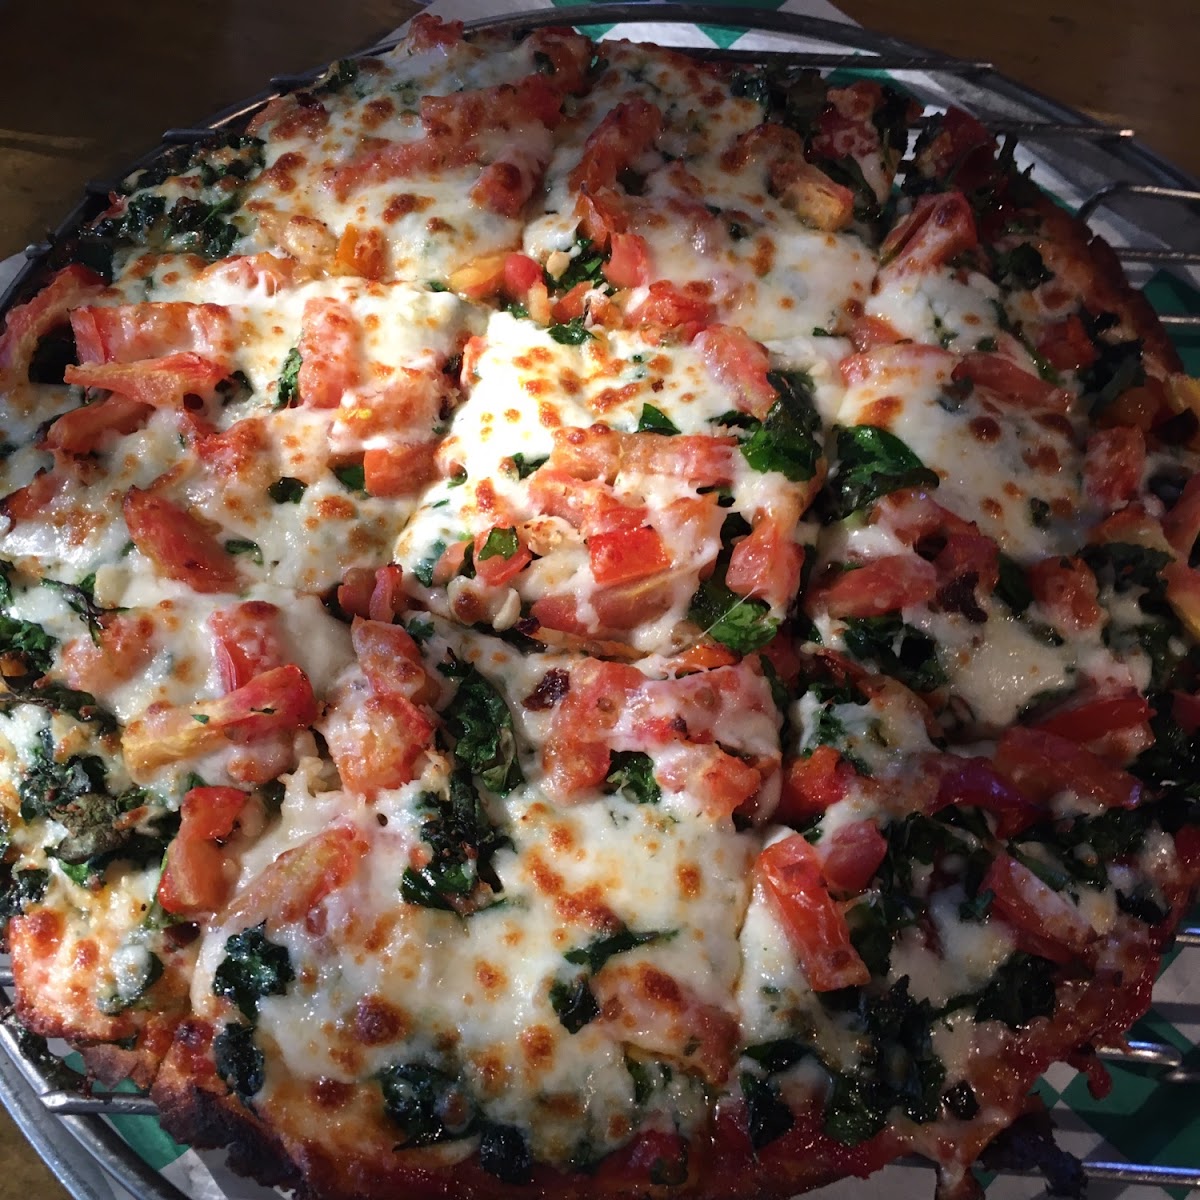 Their GF pizza is a 10" option. I tried the "Signature" Fresh Spinach & added Pepperoni which was very tasty! (Not sure if celiac-friendly though)